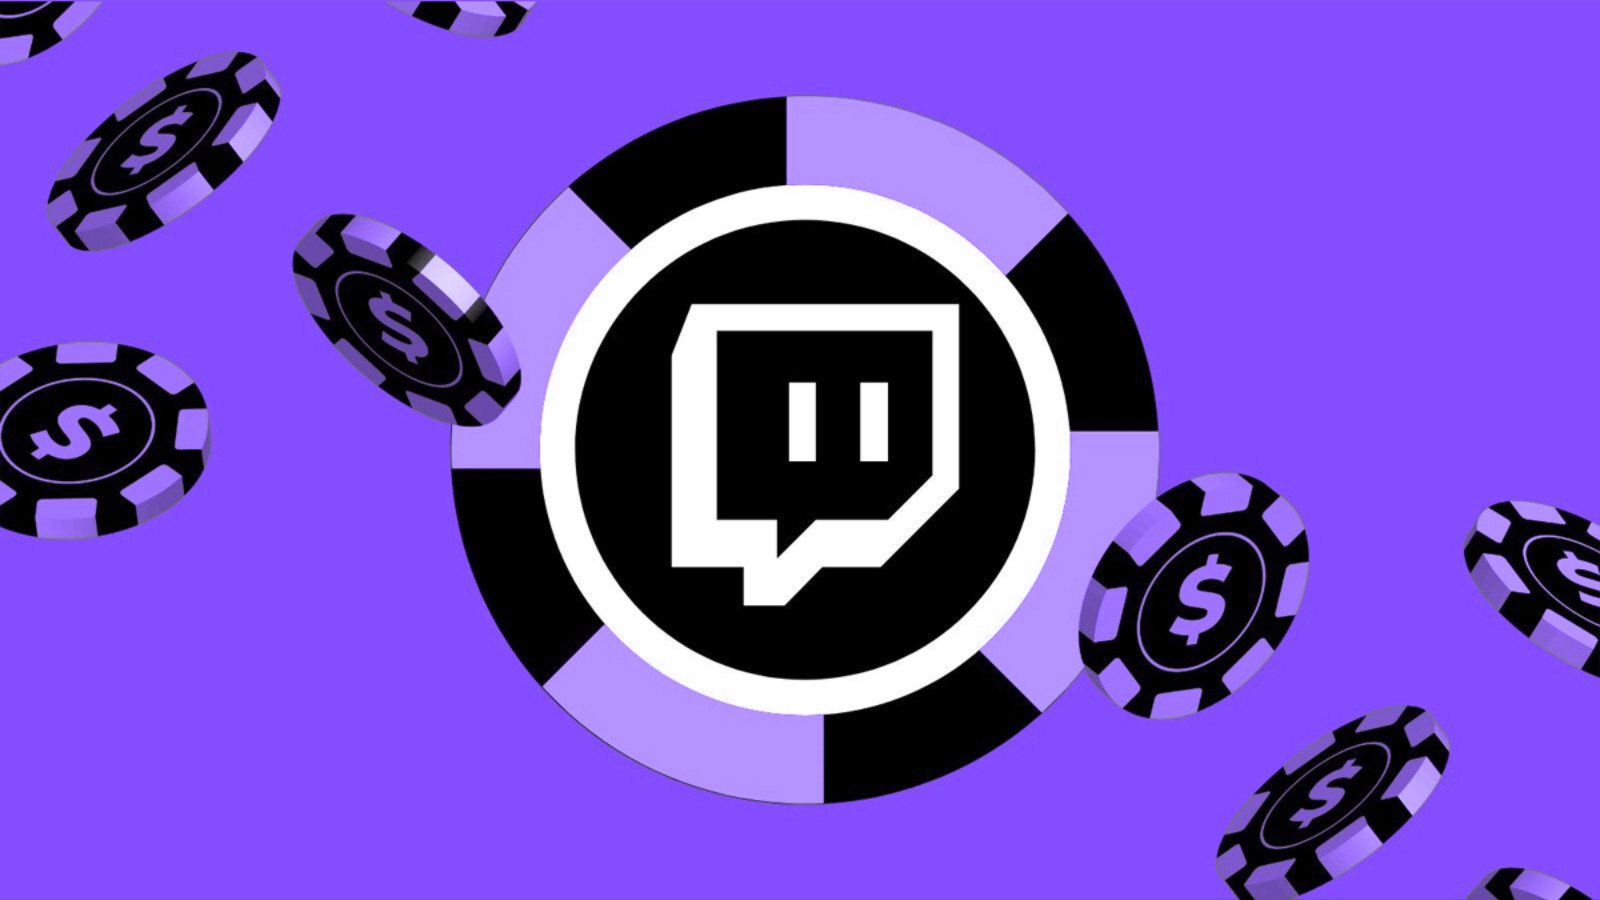 Twitch bans gambling features after streamer backlash, but there’s a catch